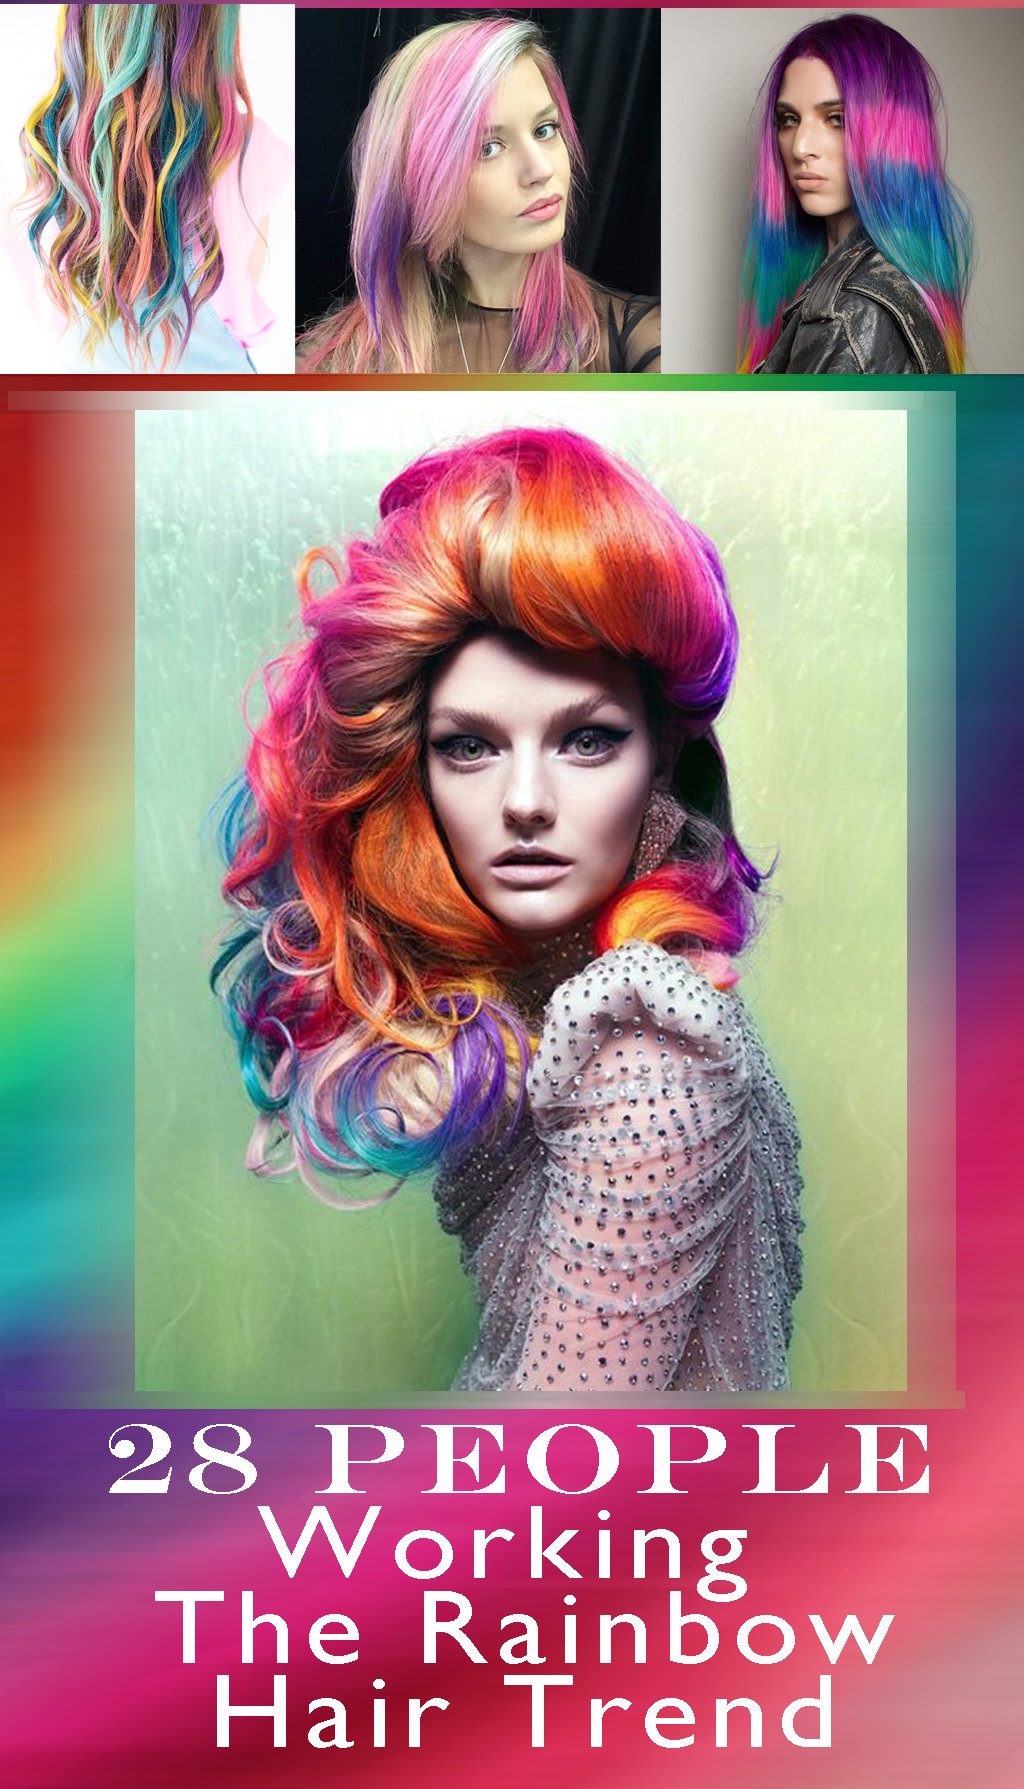 28 People Working The Rainbow Hair Trend Better Than Anyone- #9 is So Subtle Yet Blue